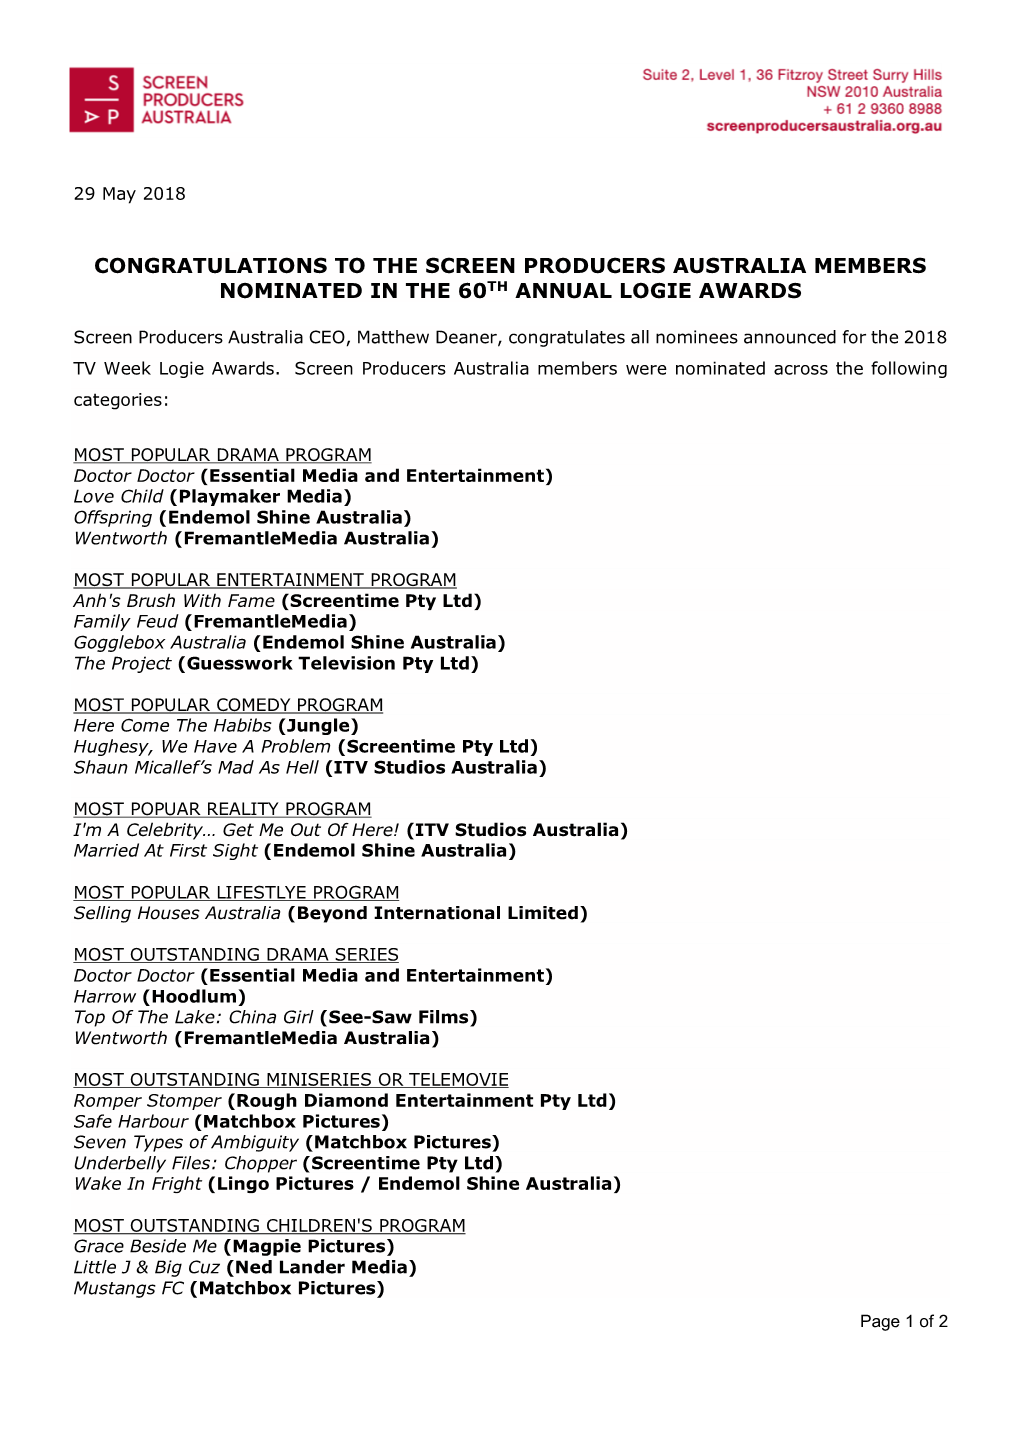 Congratulations to the Screen Producers Australia Members Nominated in the 60Th Annual Logie Awards